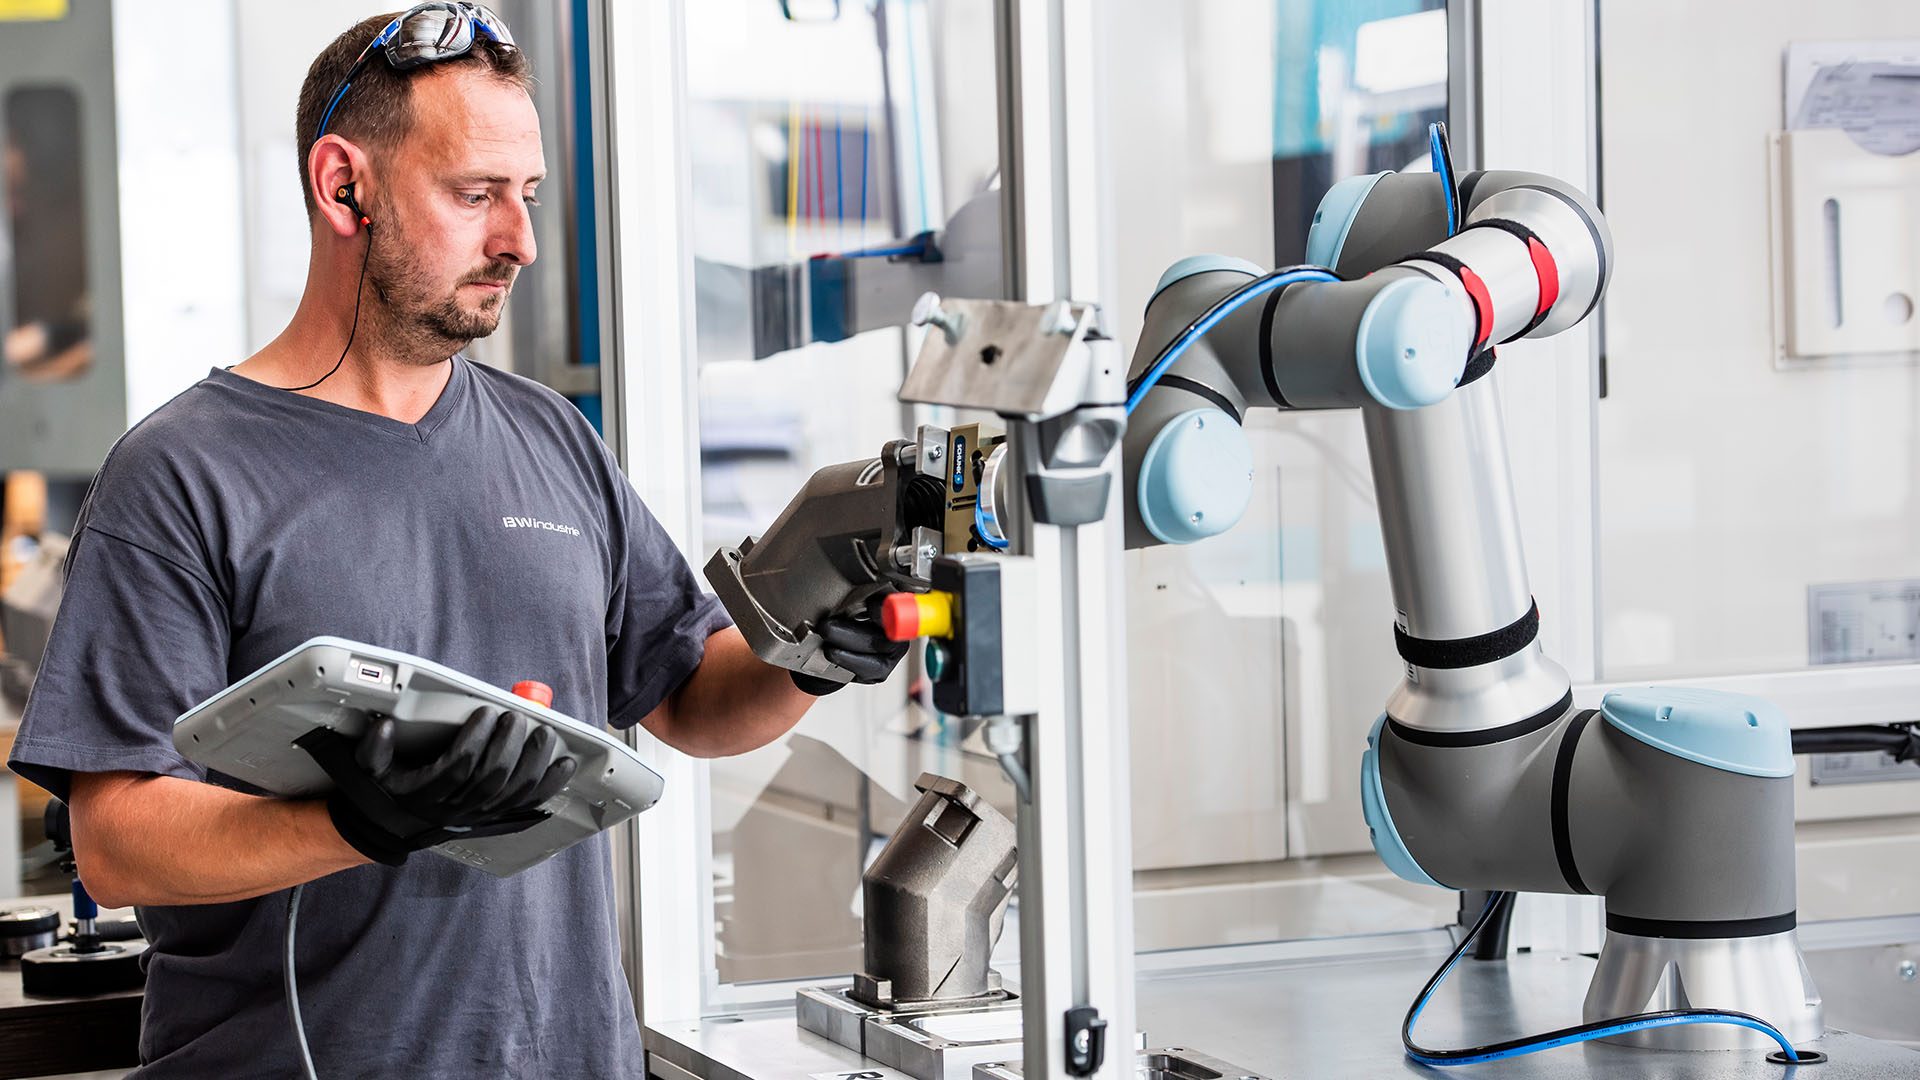 Cobots create new jobs? How can that be? 1